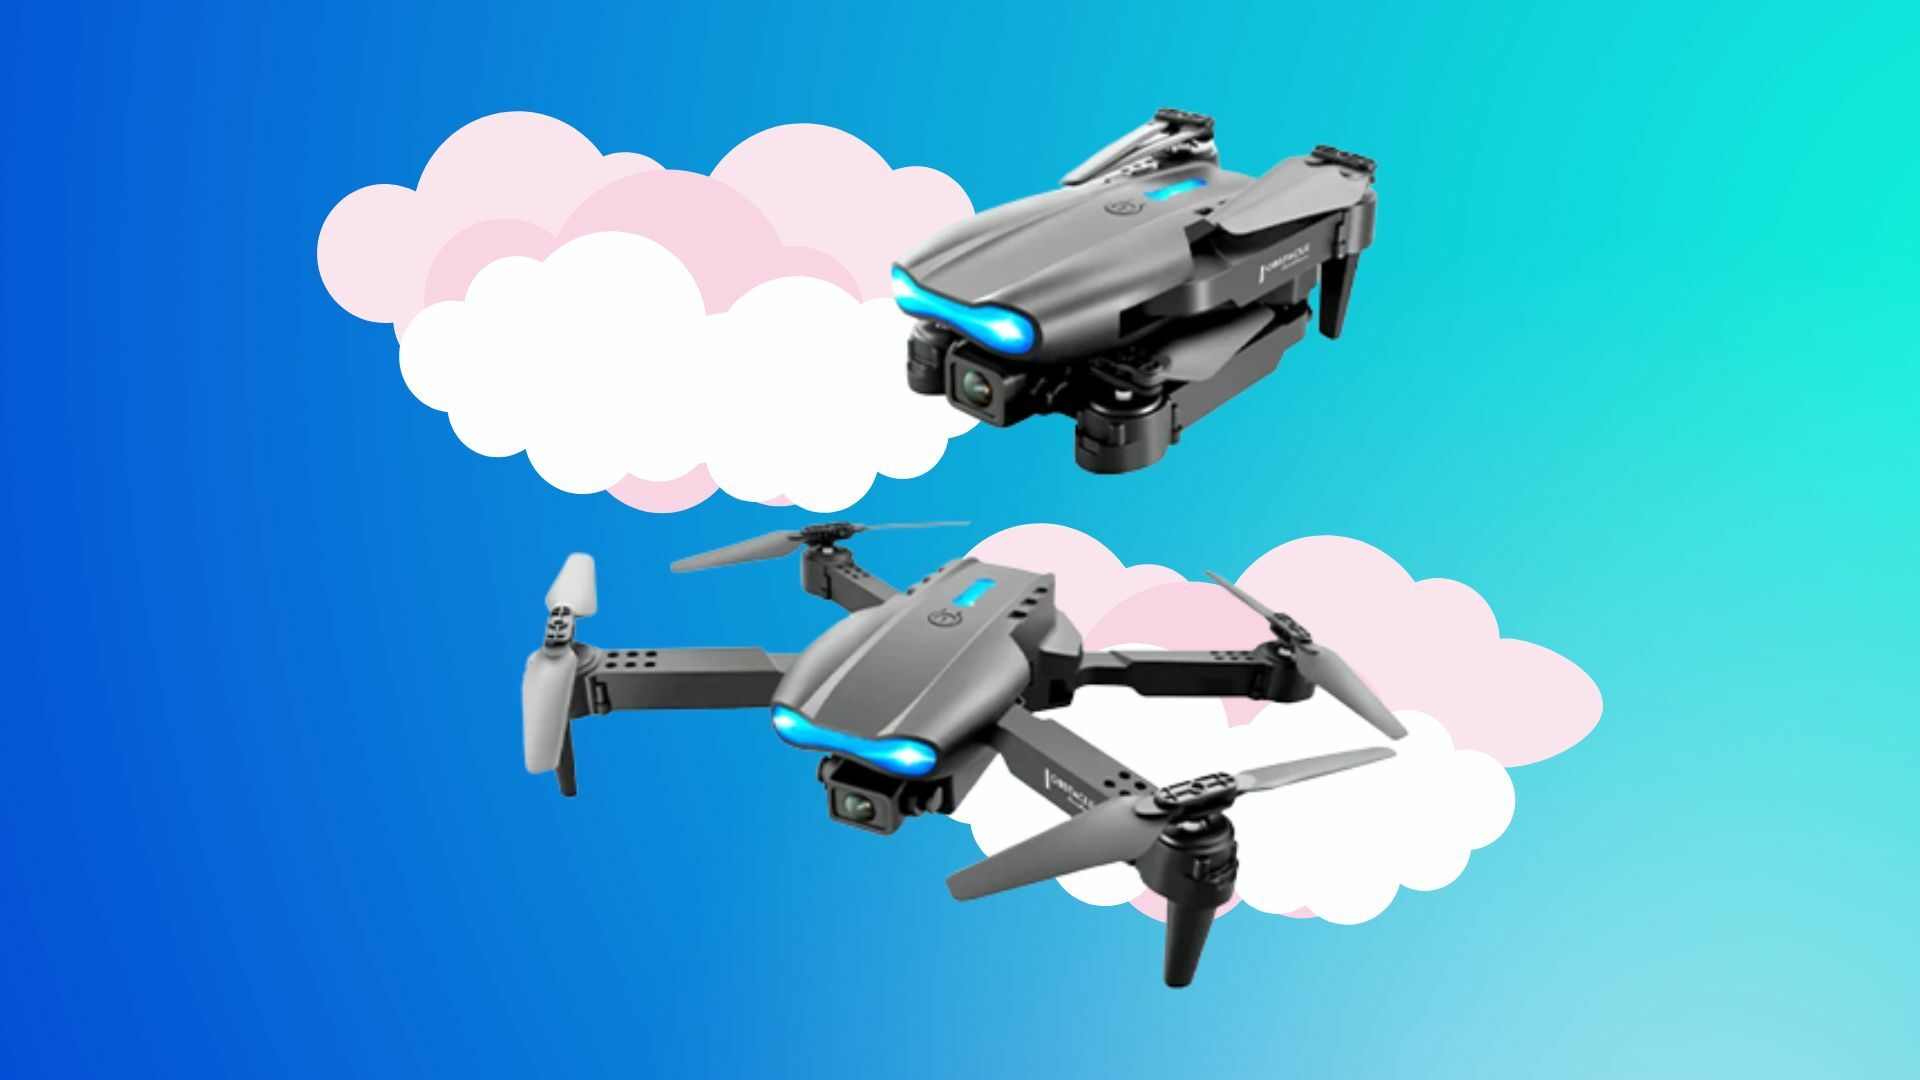 Ninja Dragon Blade X PRO 4K Dual Camera Smart Quadcopter Drone on a colorful background.